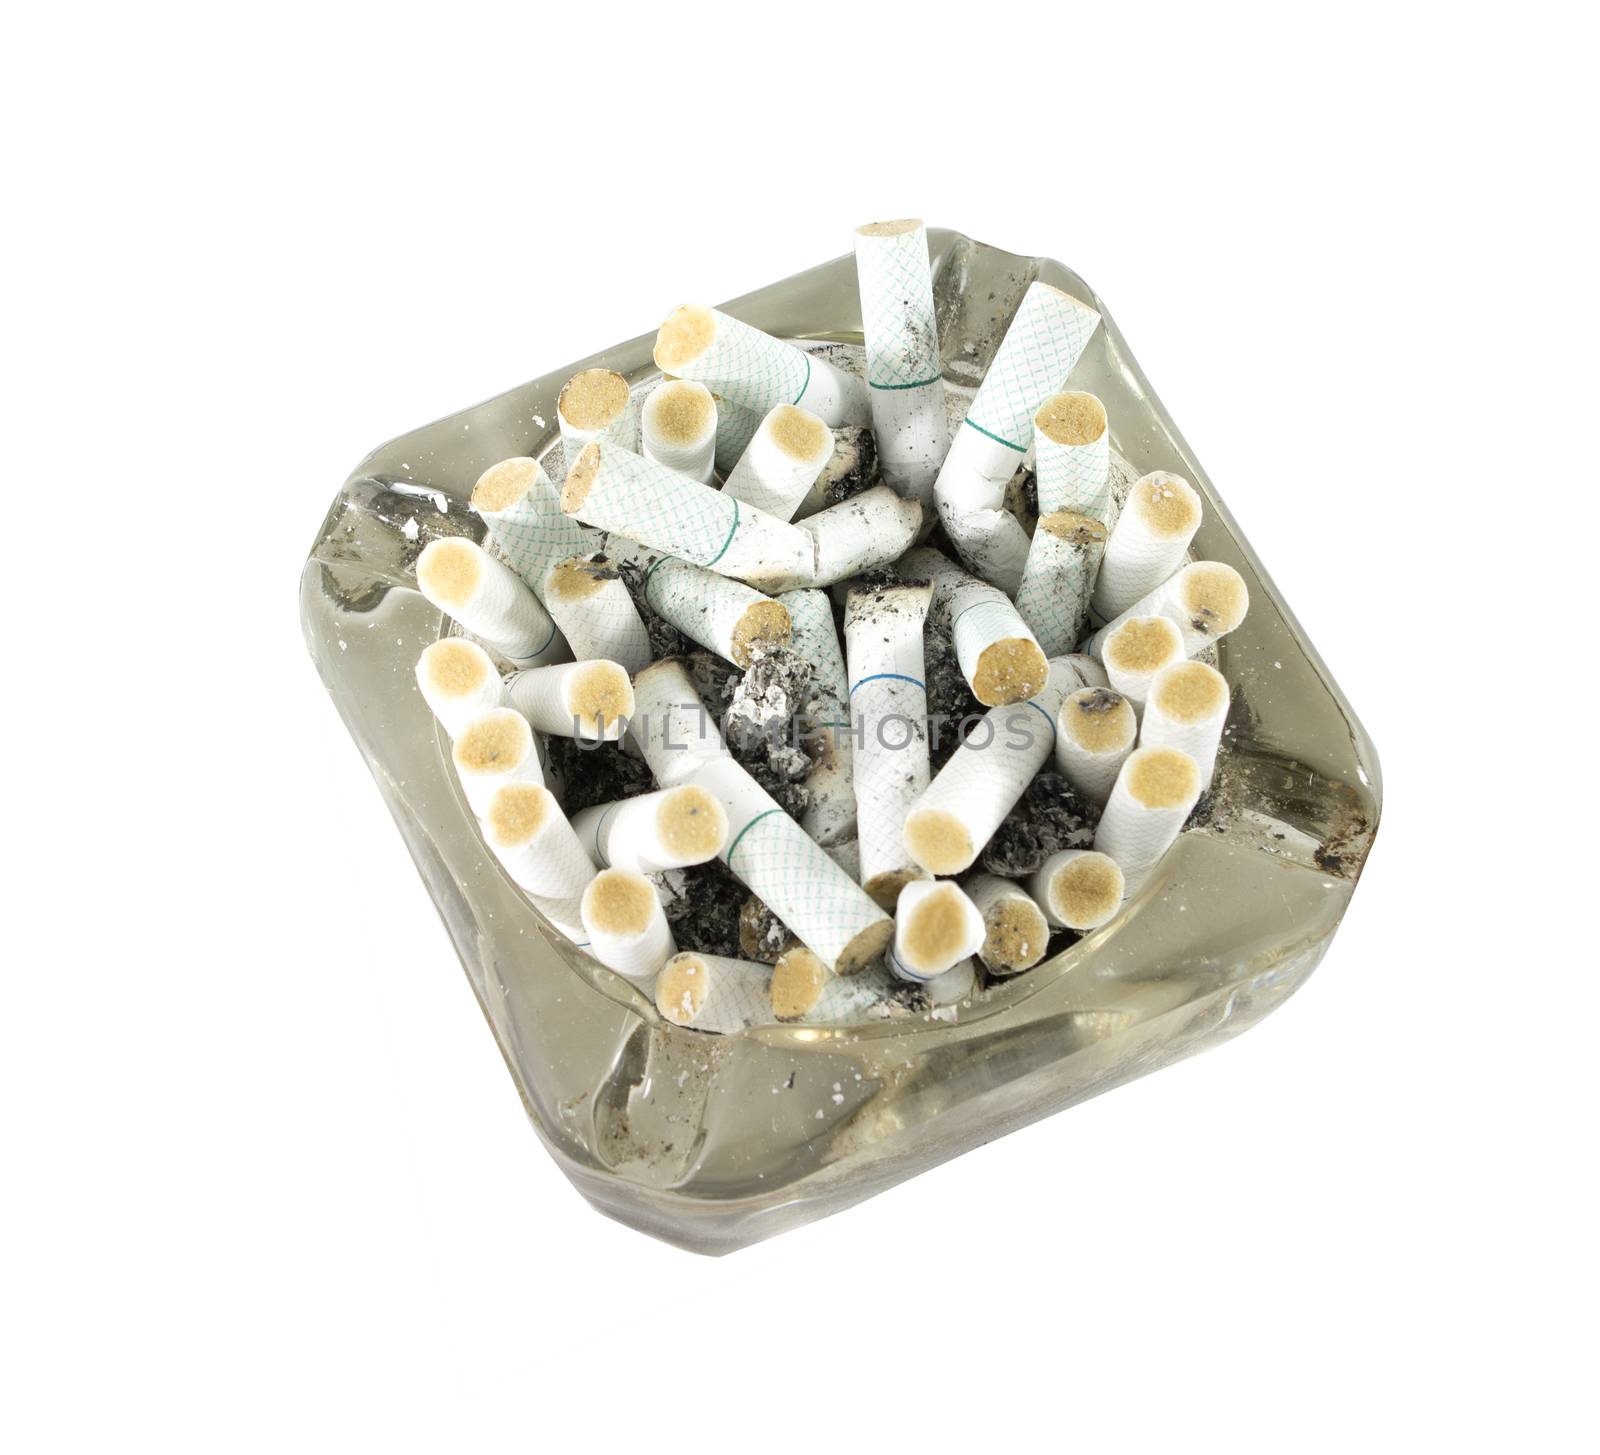 Cigarette butt in ashtray isolated on white background